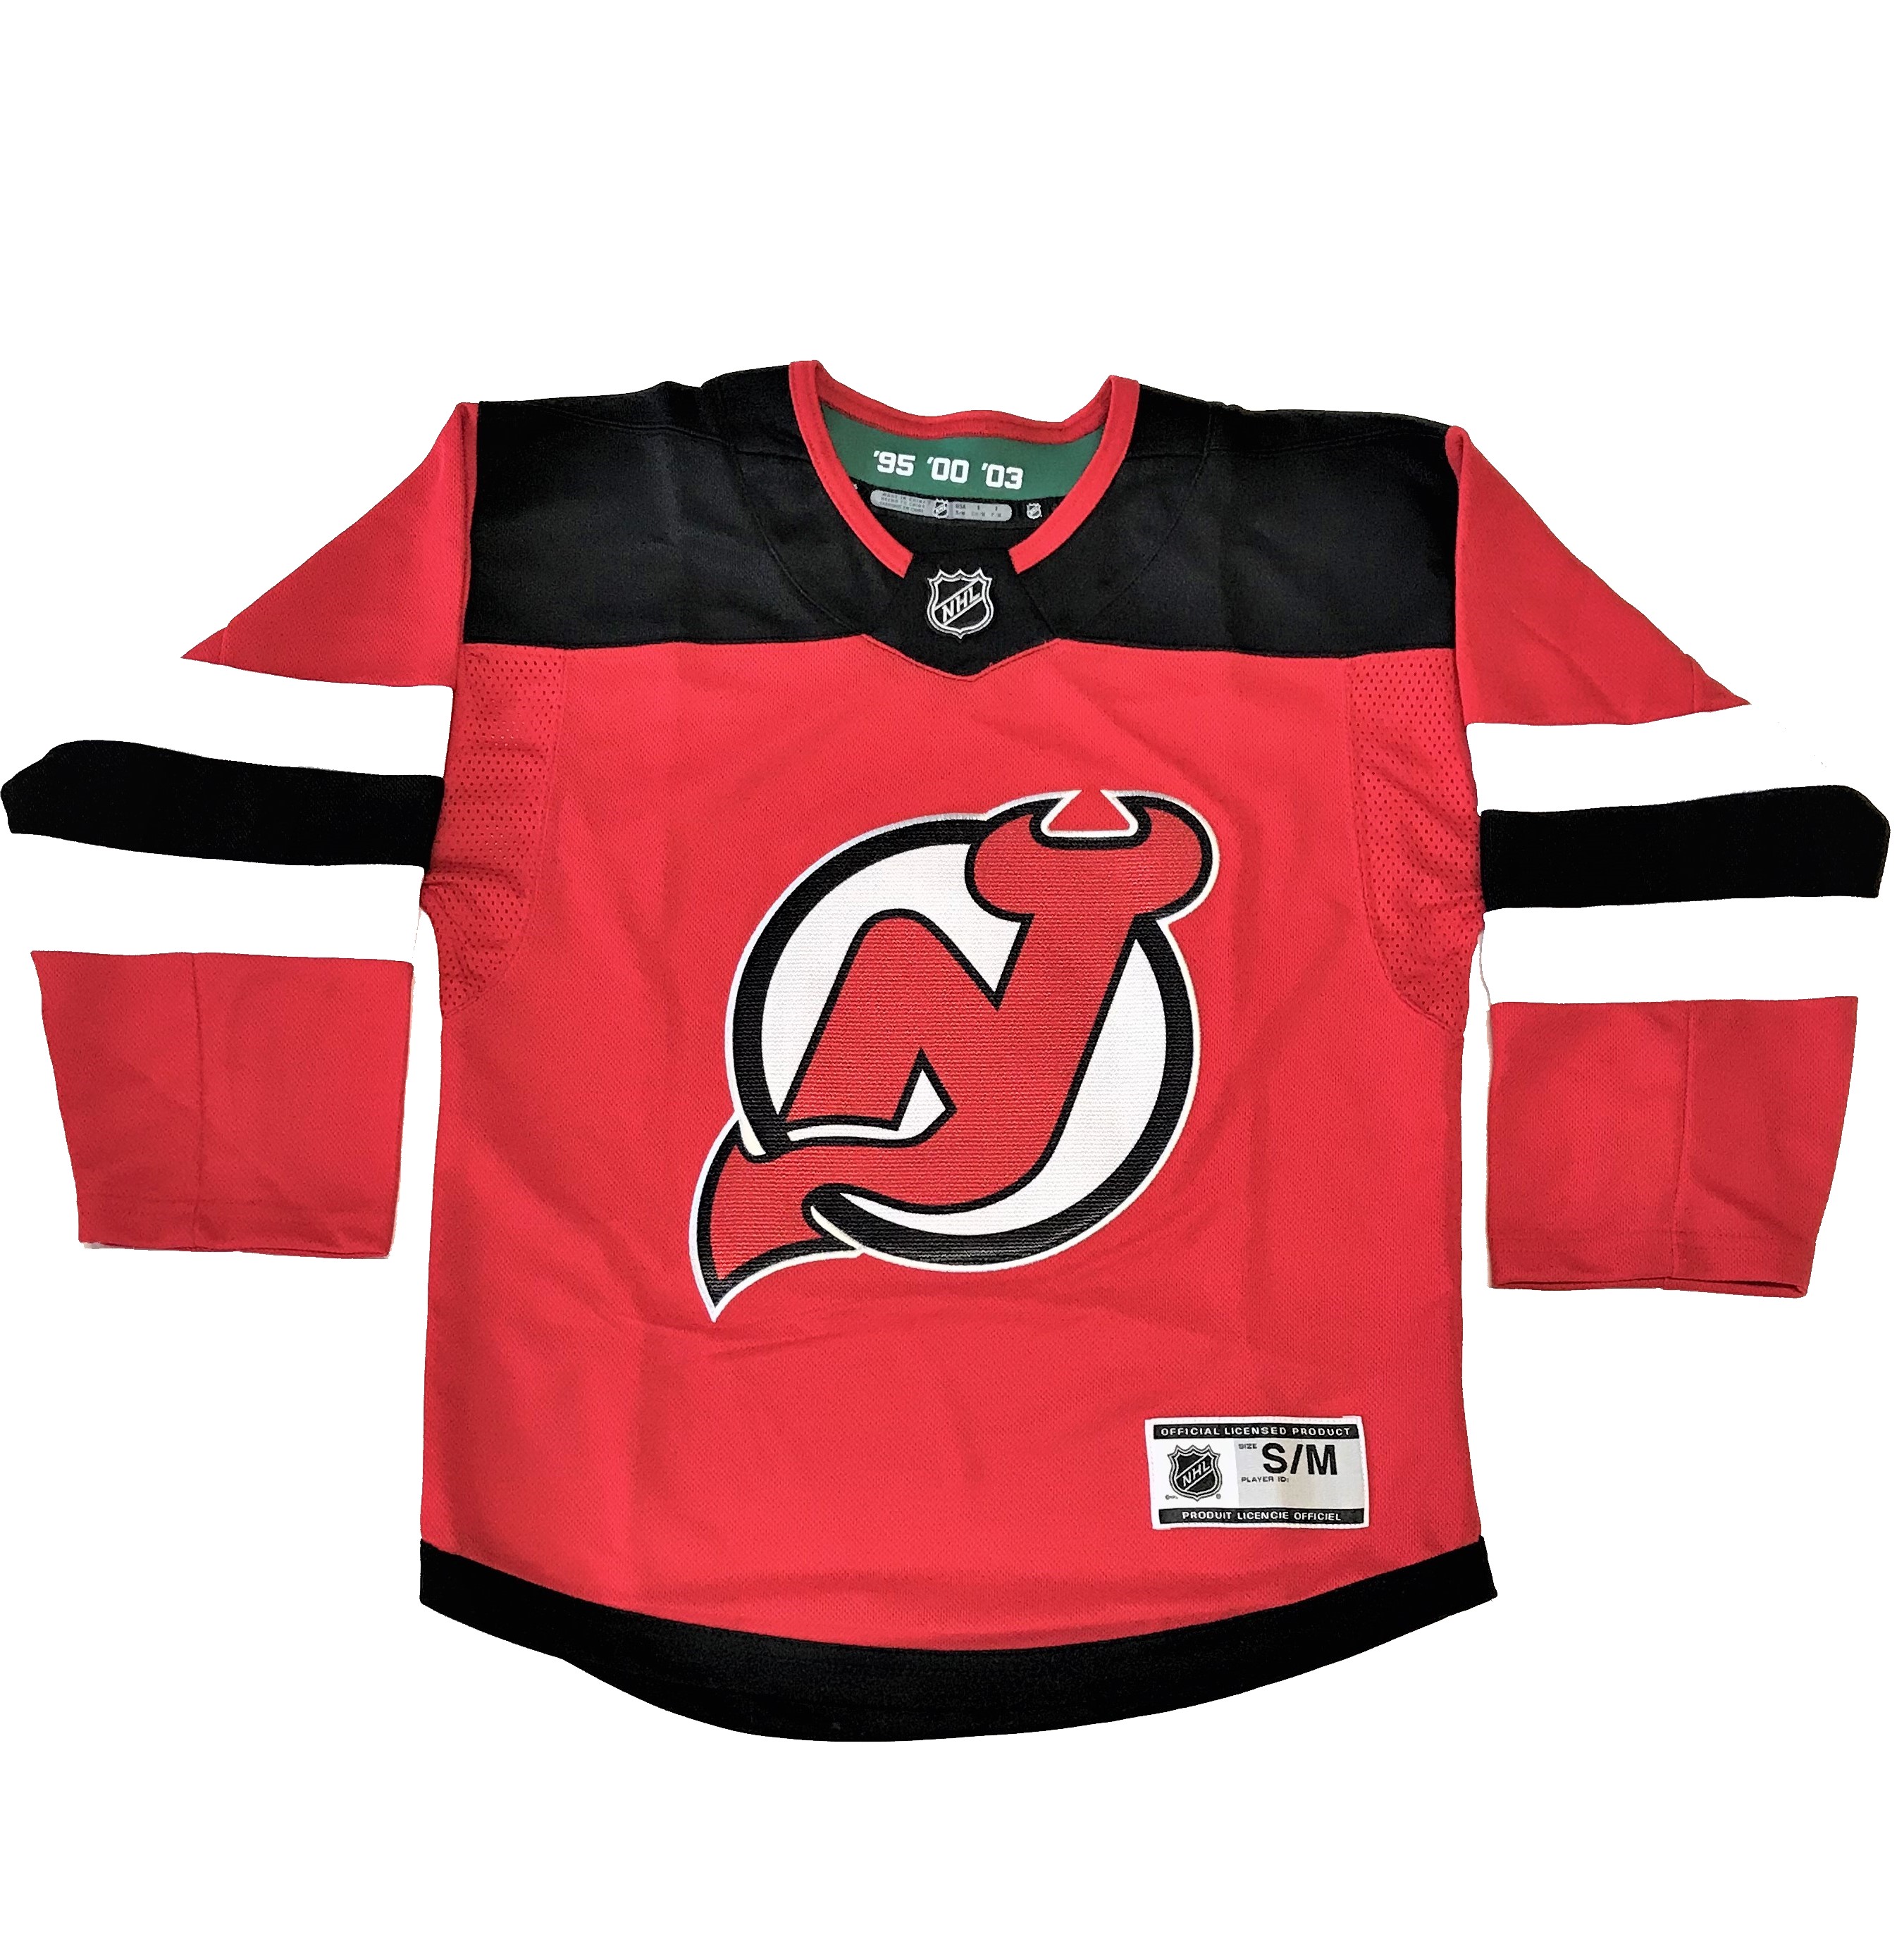 achat maillot nhl pas cher